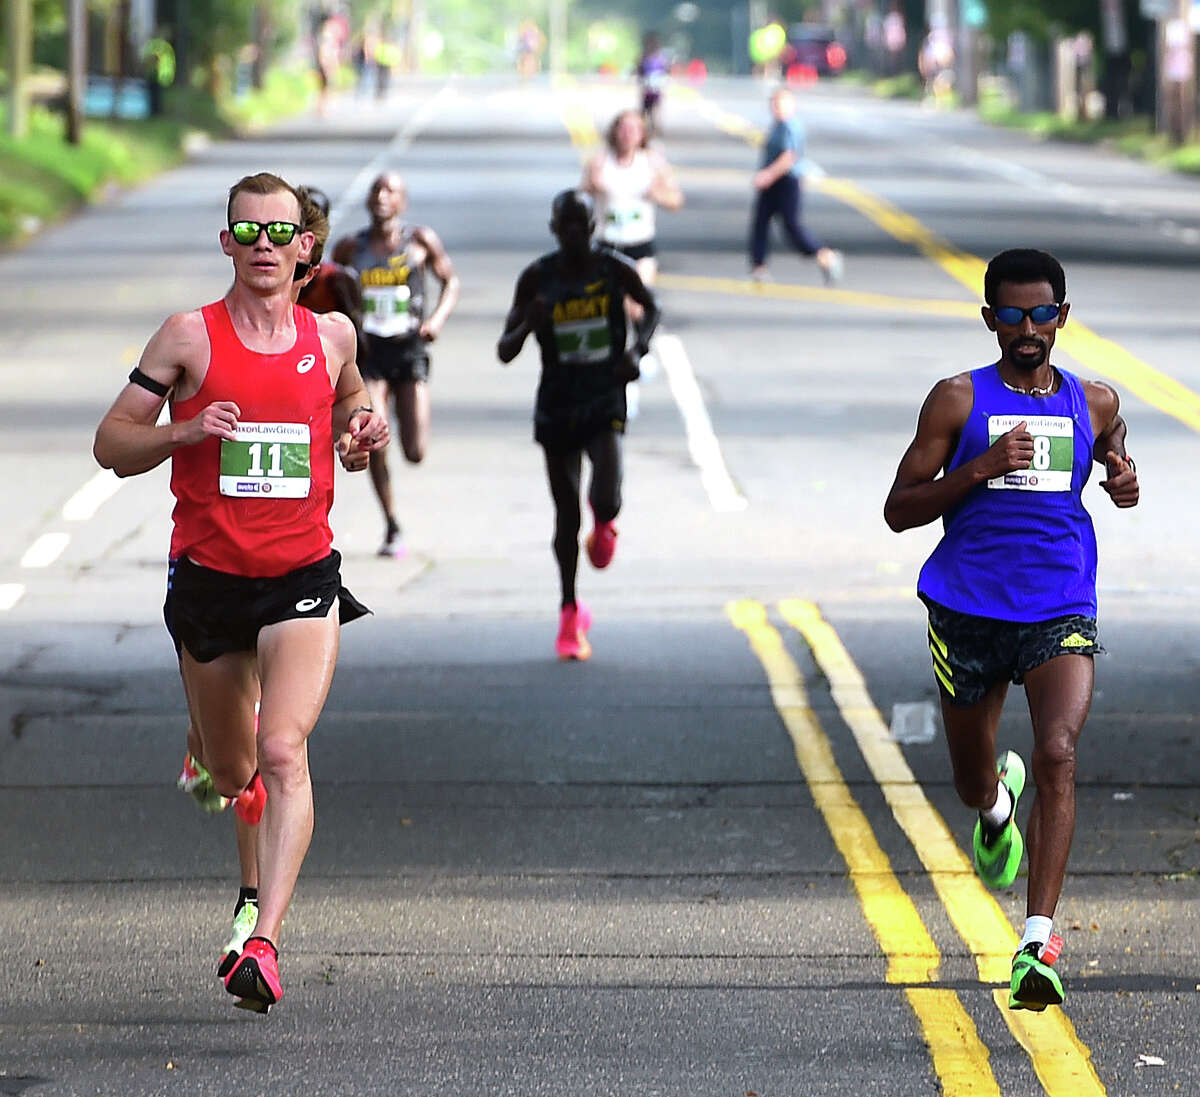 Clayton Young, Emily Sisson win New Haven Road Race 20k championships